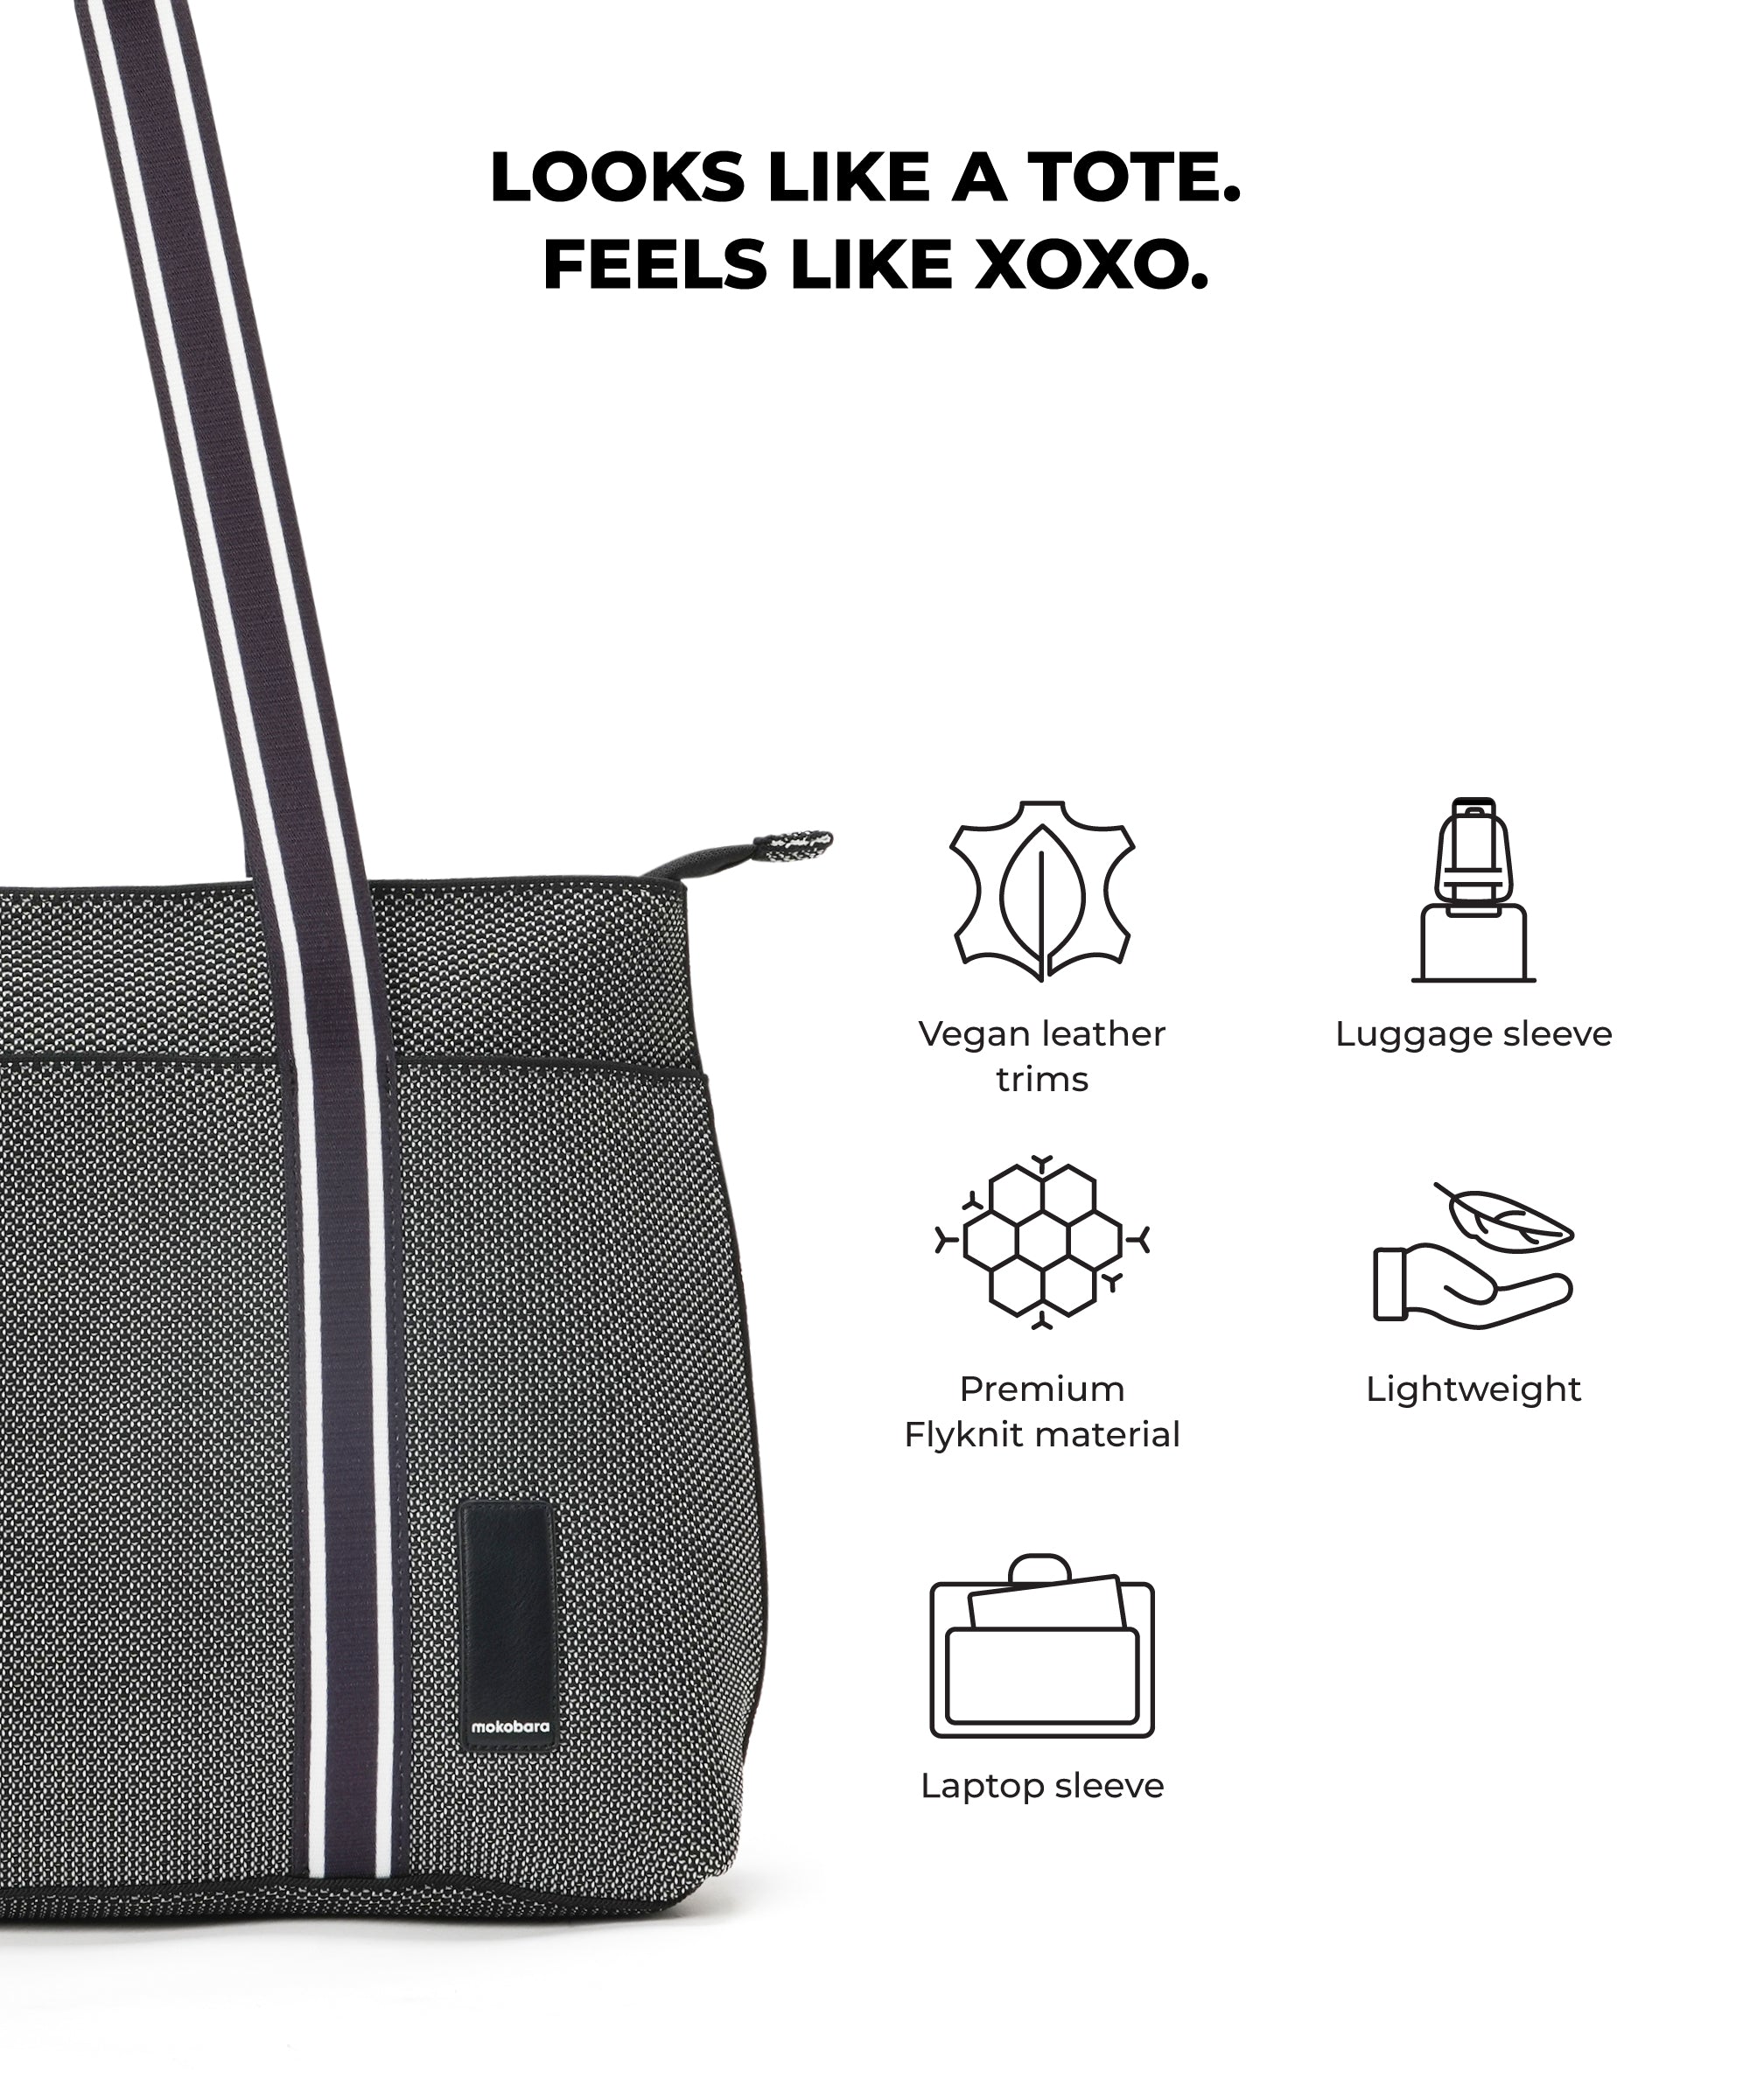 Color_Dot Png | The XOXO Carry-All Tote